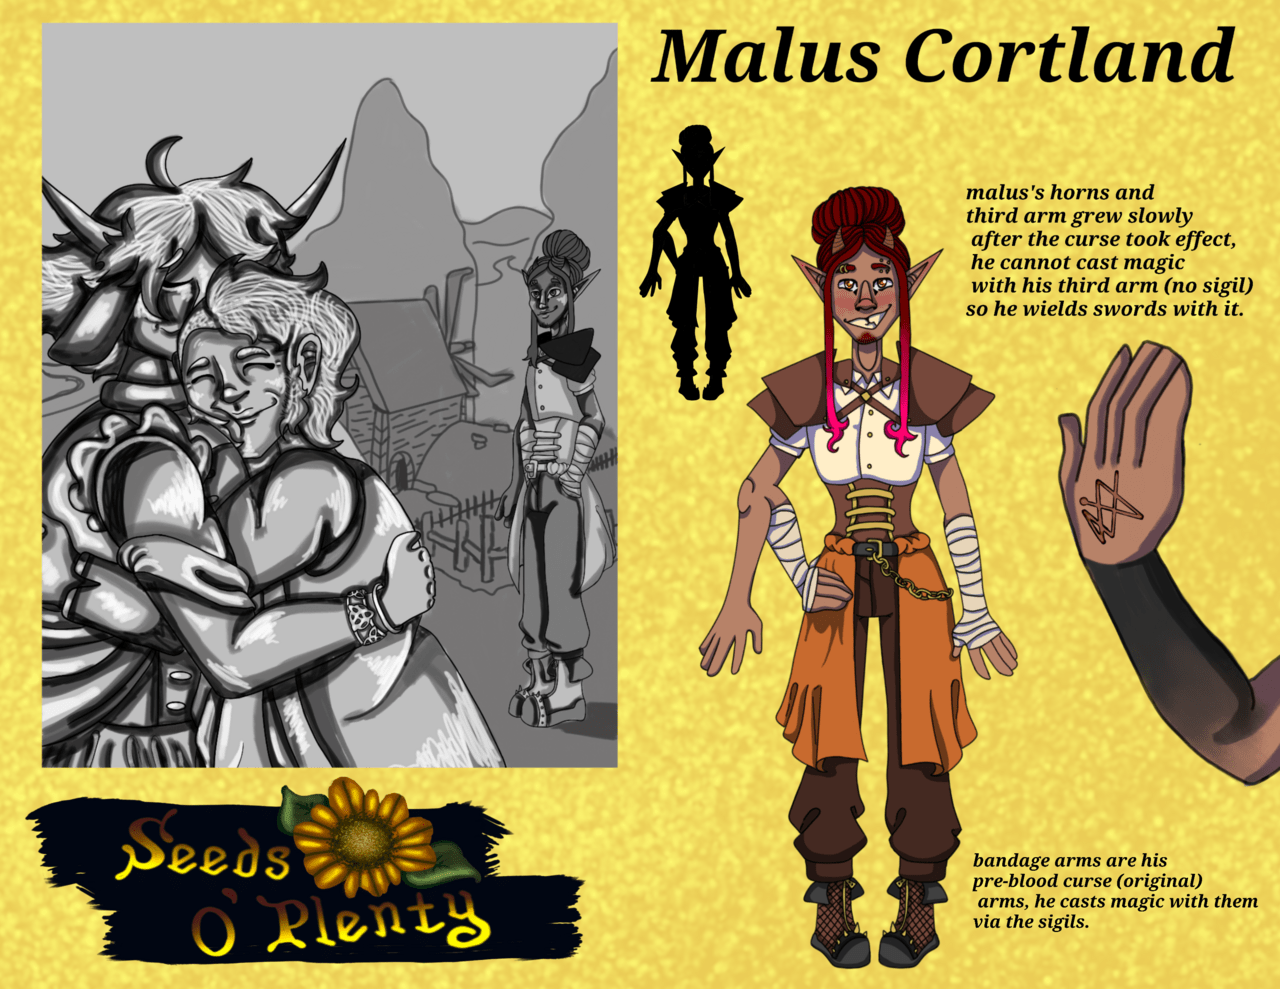 Character study. Name is Malus Cortland. Image contains several illustrations. On the left is a greyscale image of the character hugging another character. On the right is a full body illustration of the character, a silhouette of the character, and a detail of the character's hand.